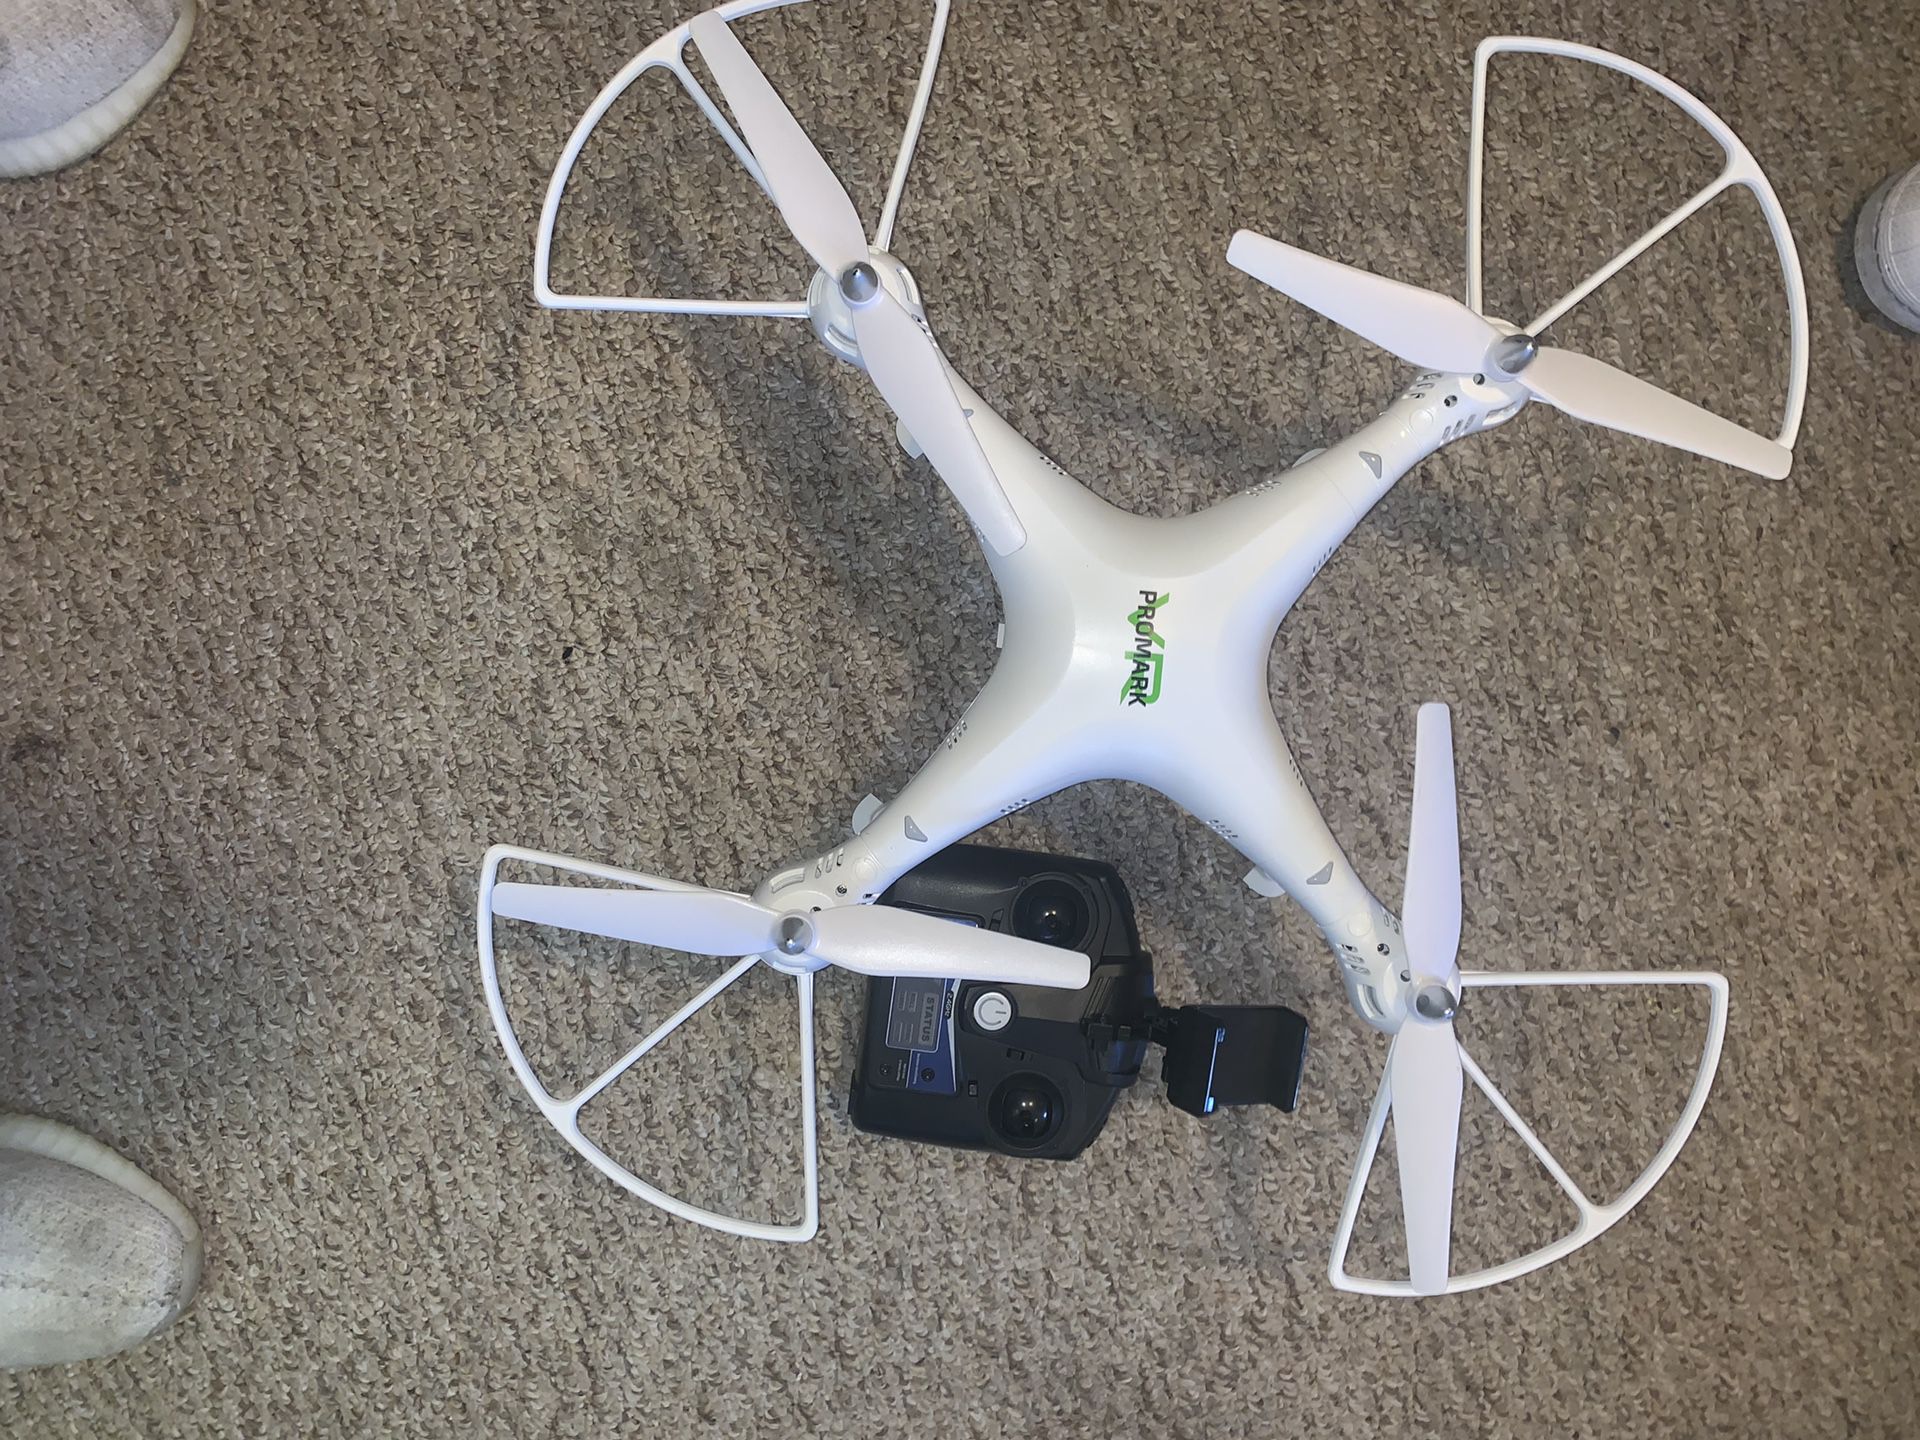 Promark Drone with VR